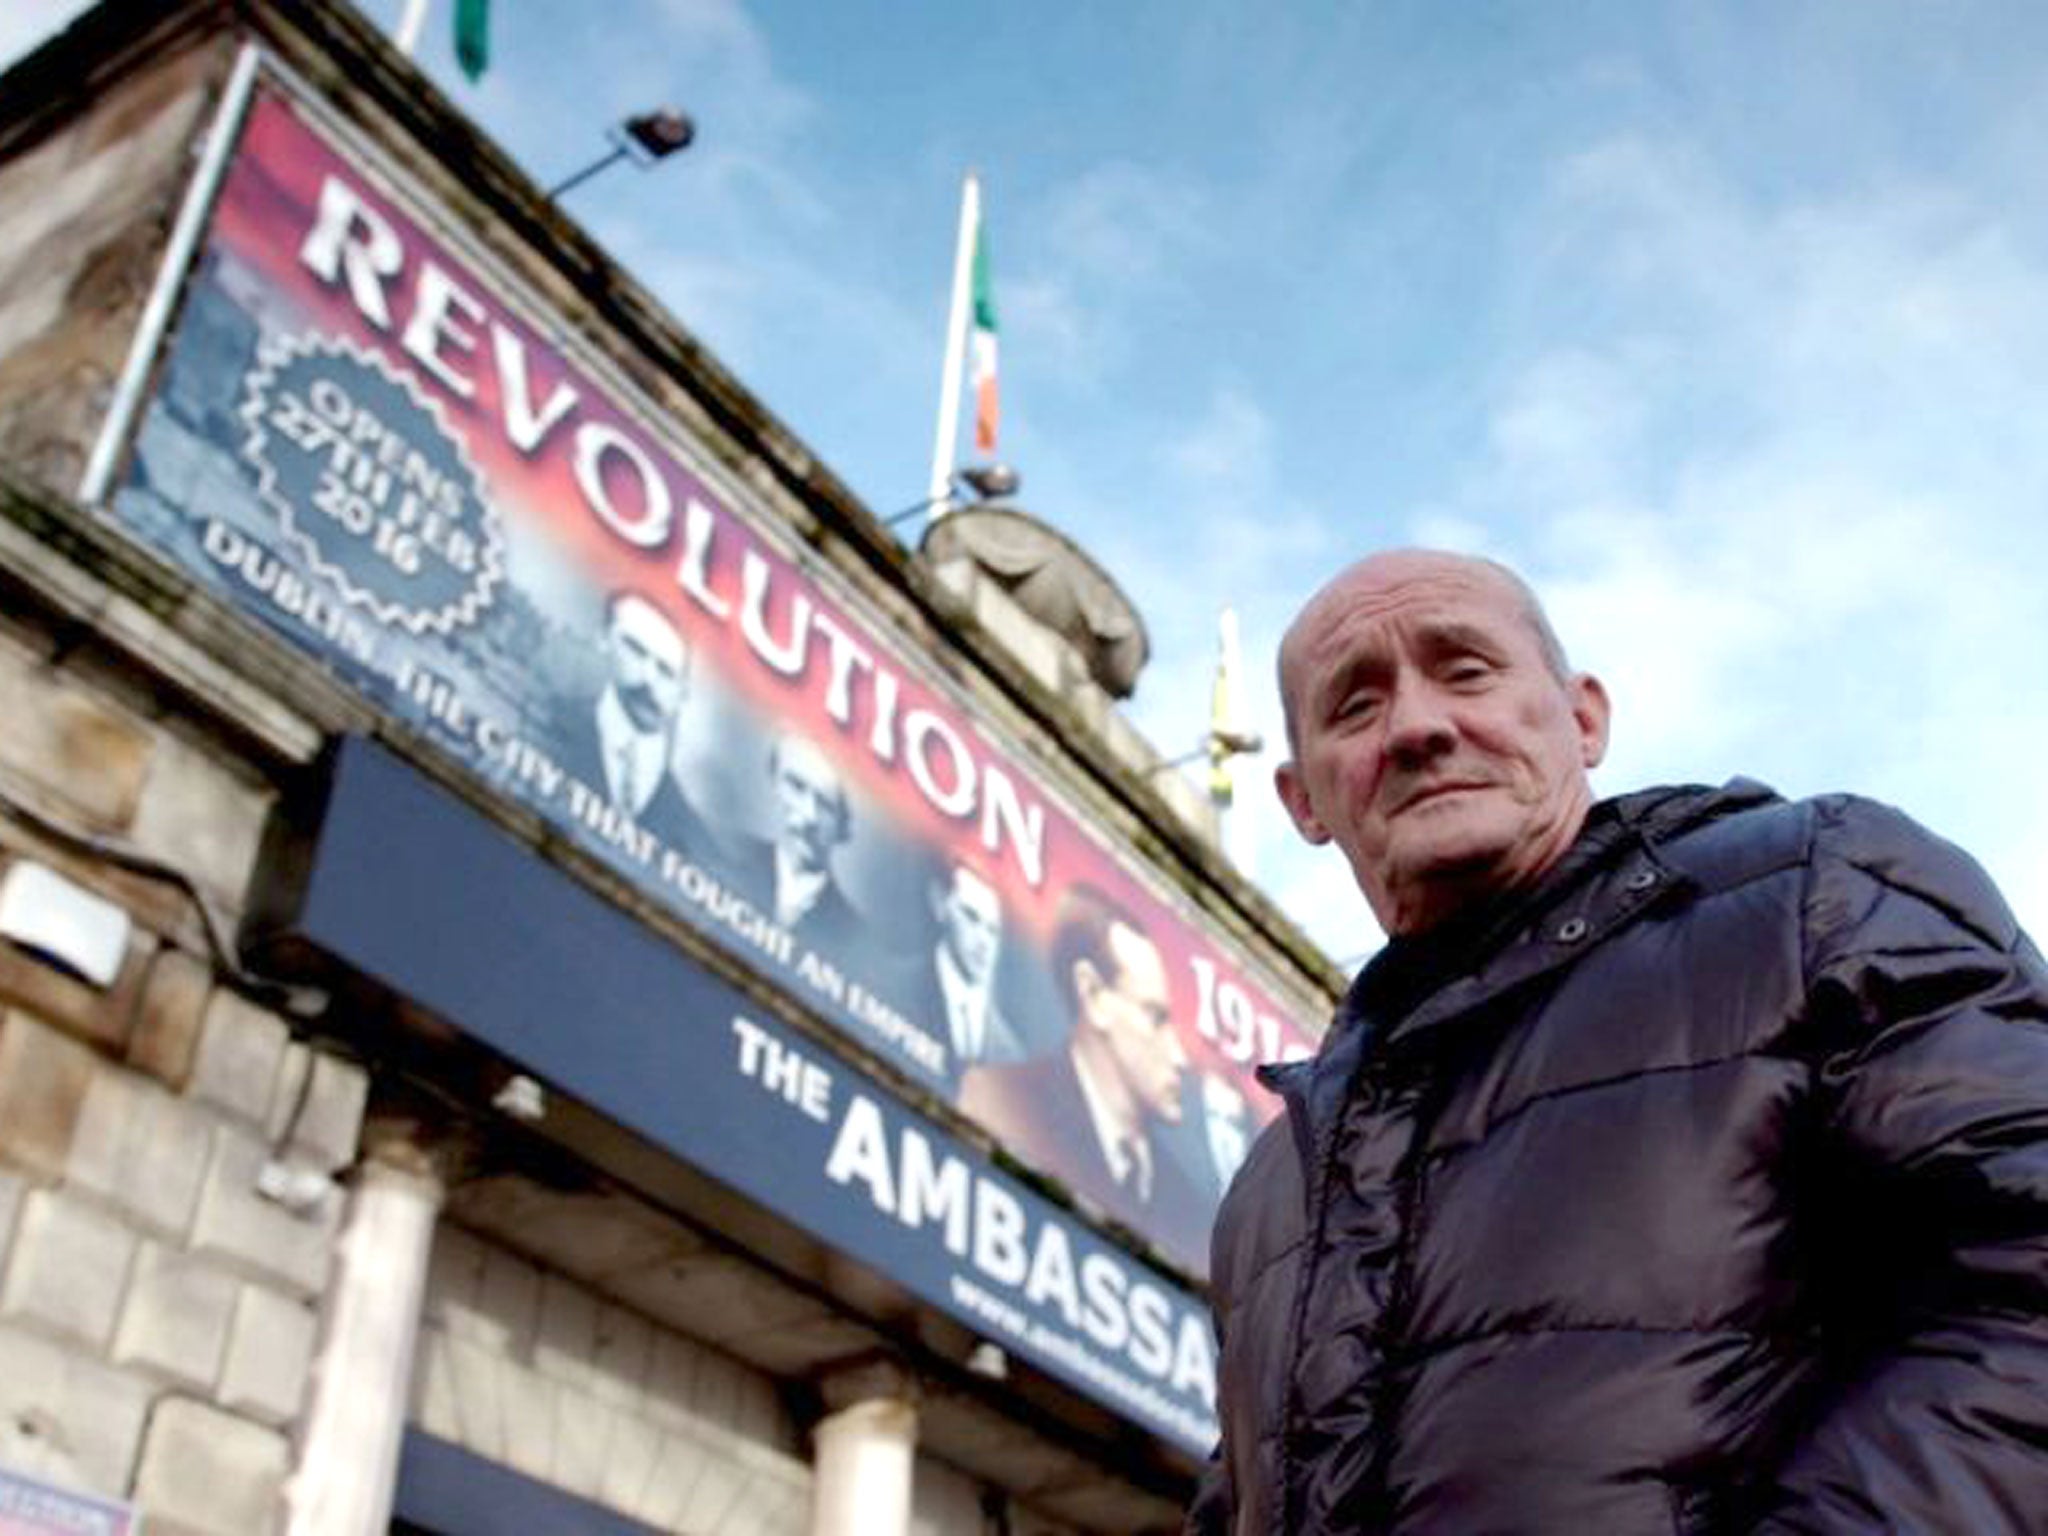 Rebels with a cause: My Family at War presenter Brendan O’Carroll in Dublin